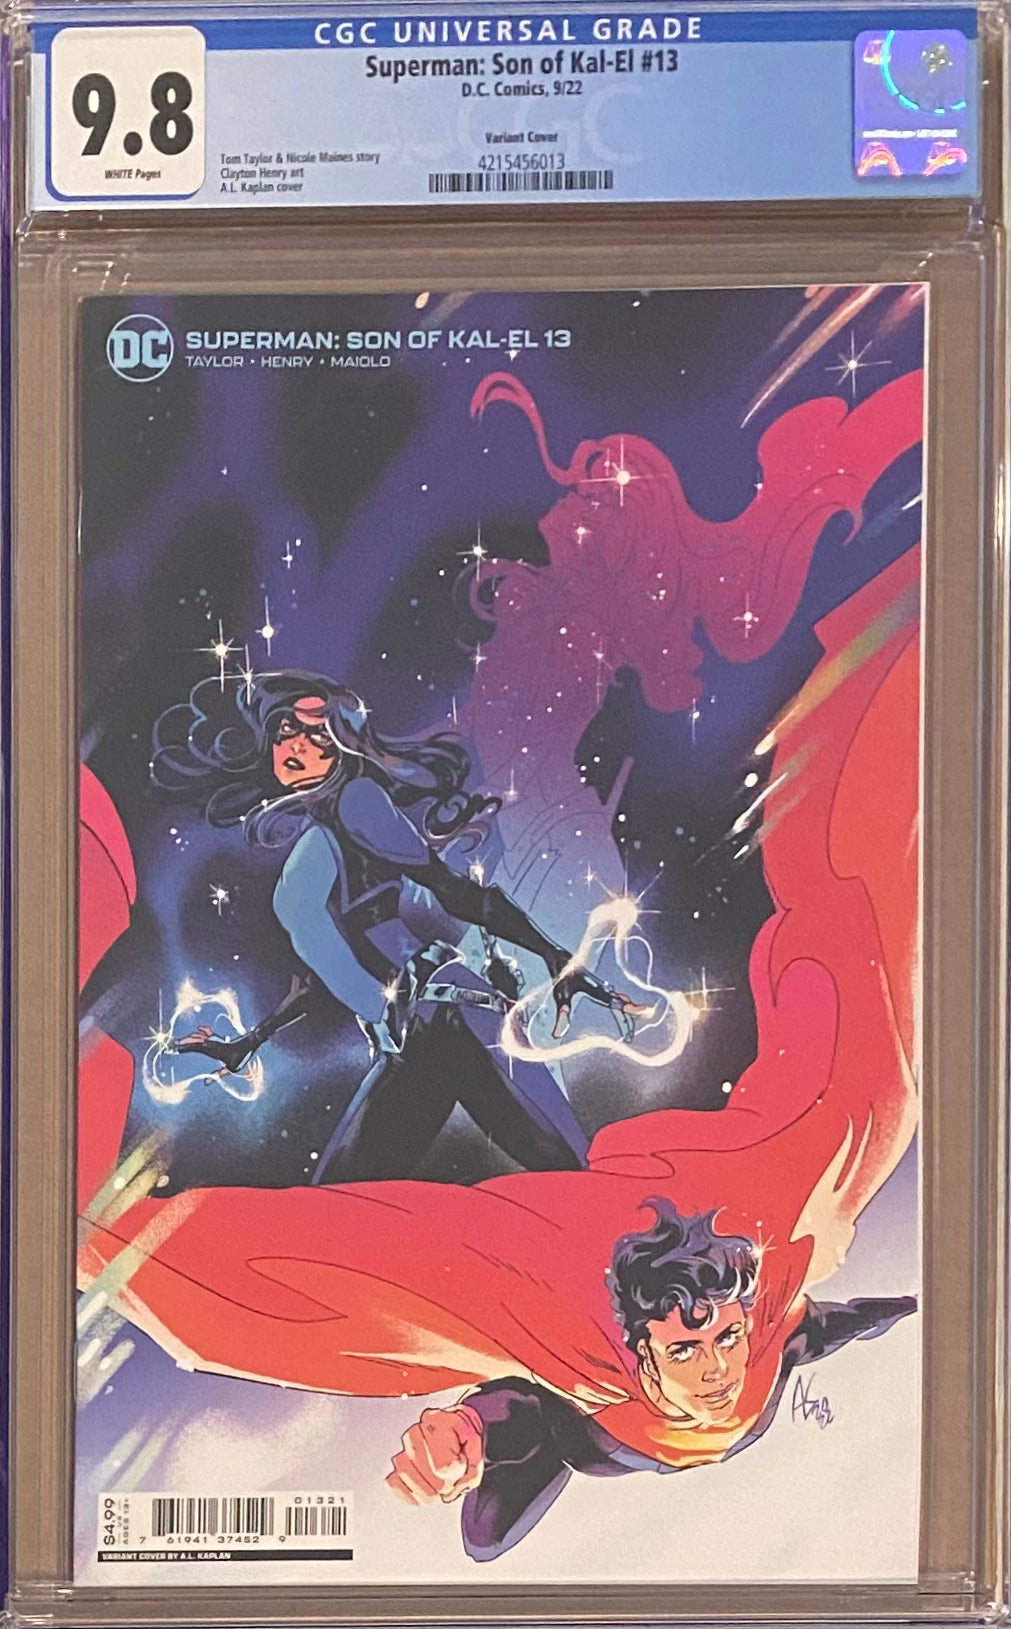 Superman: Son of Kal-El #13 Variant CGC 9.8 - First Appearance Dreamer